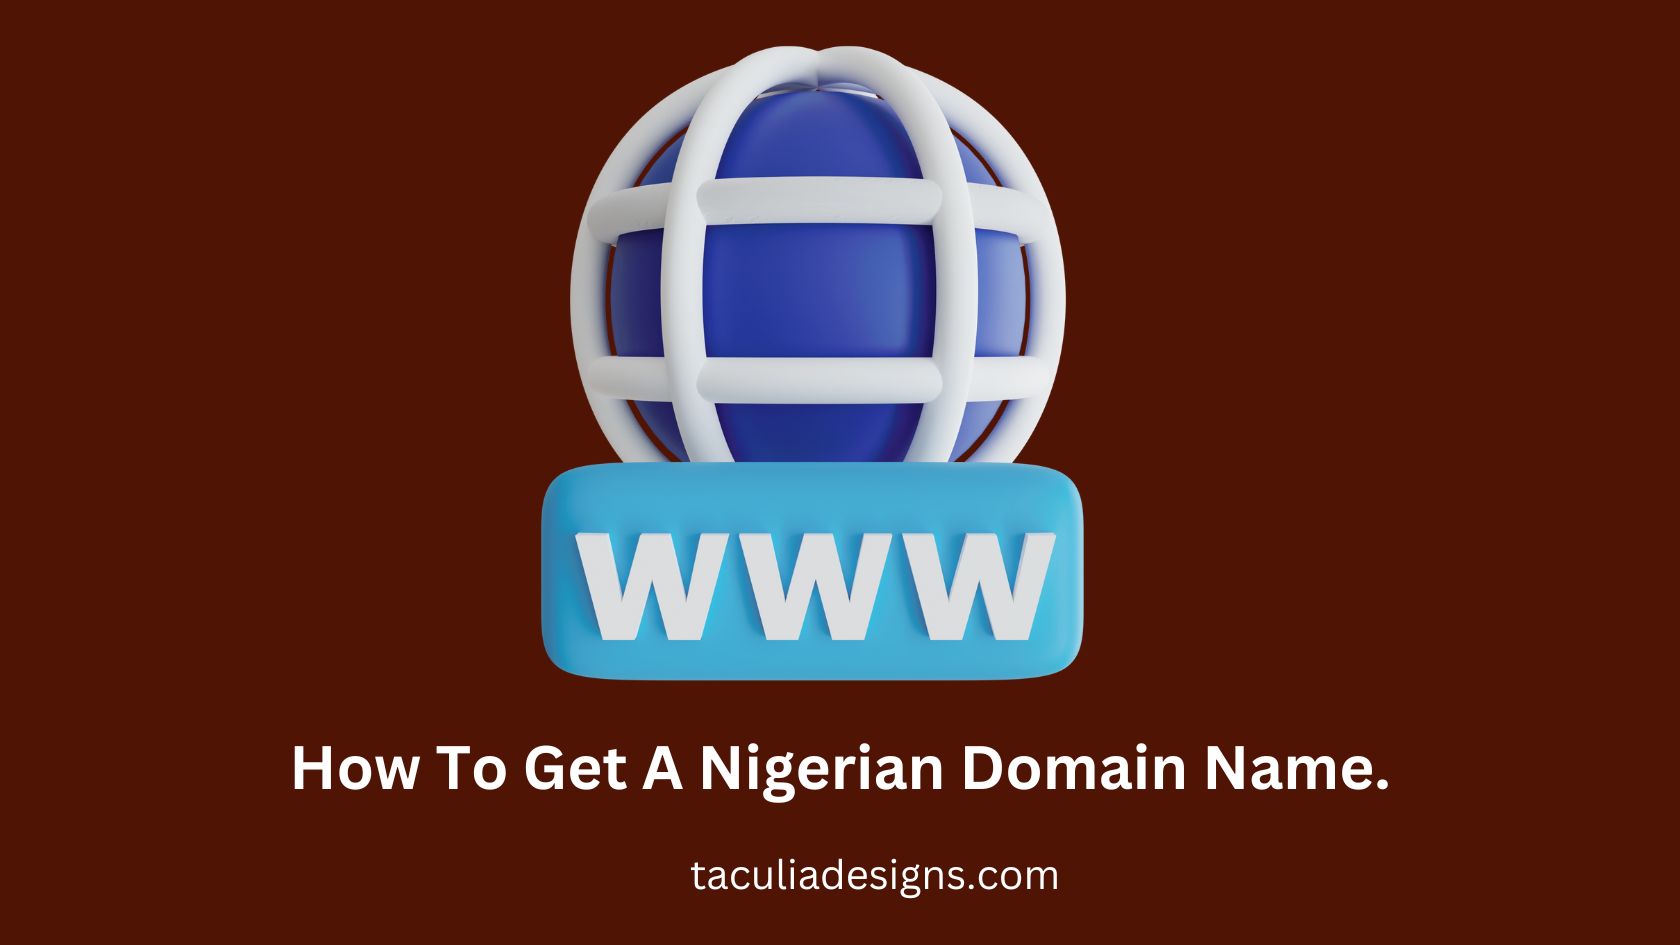 How To Get A Nigerian Domain Name.